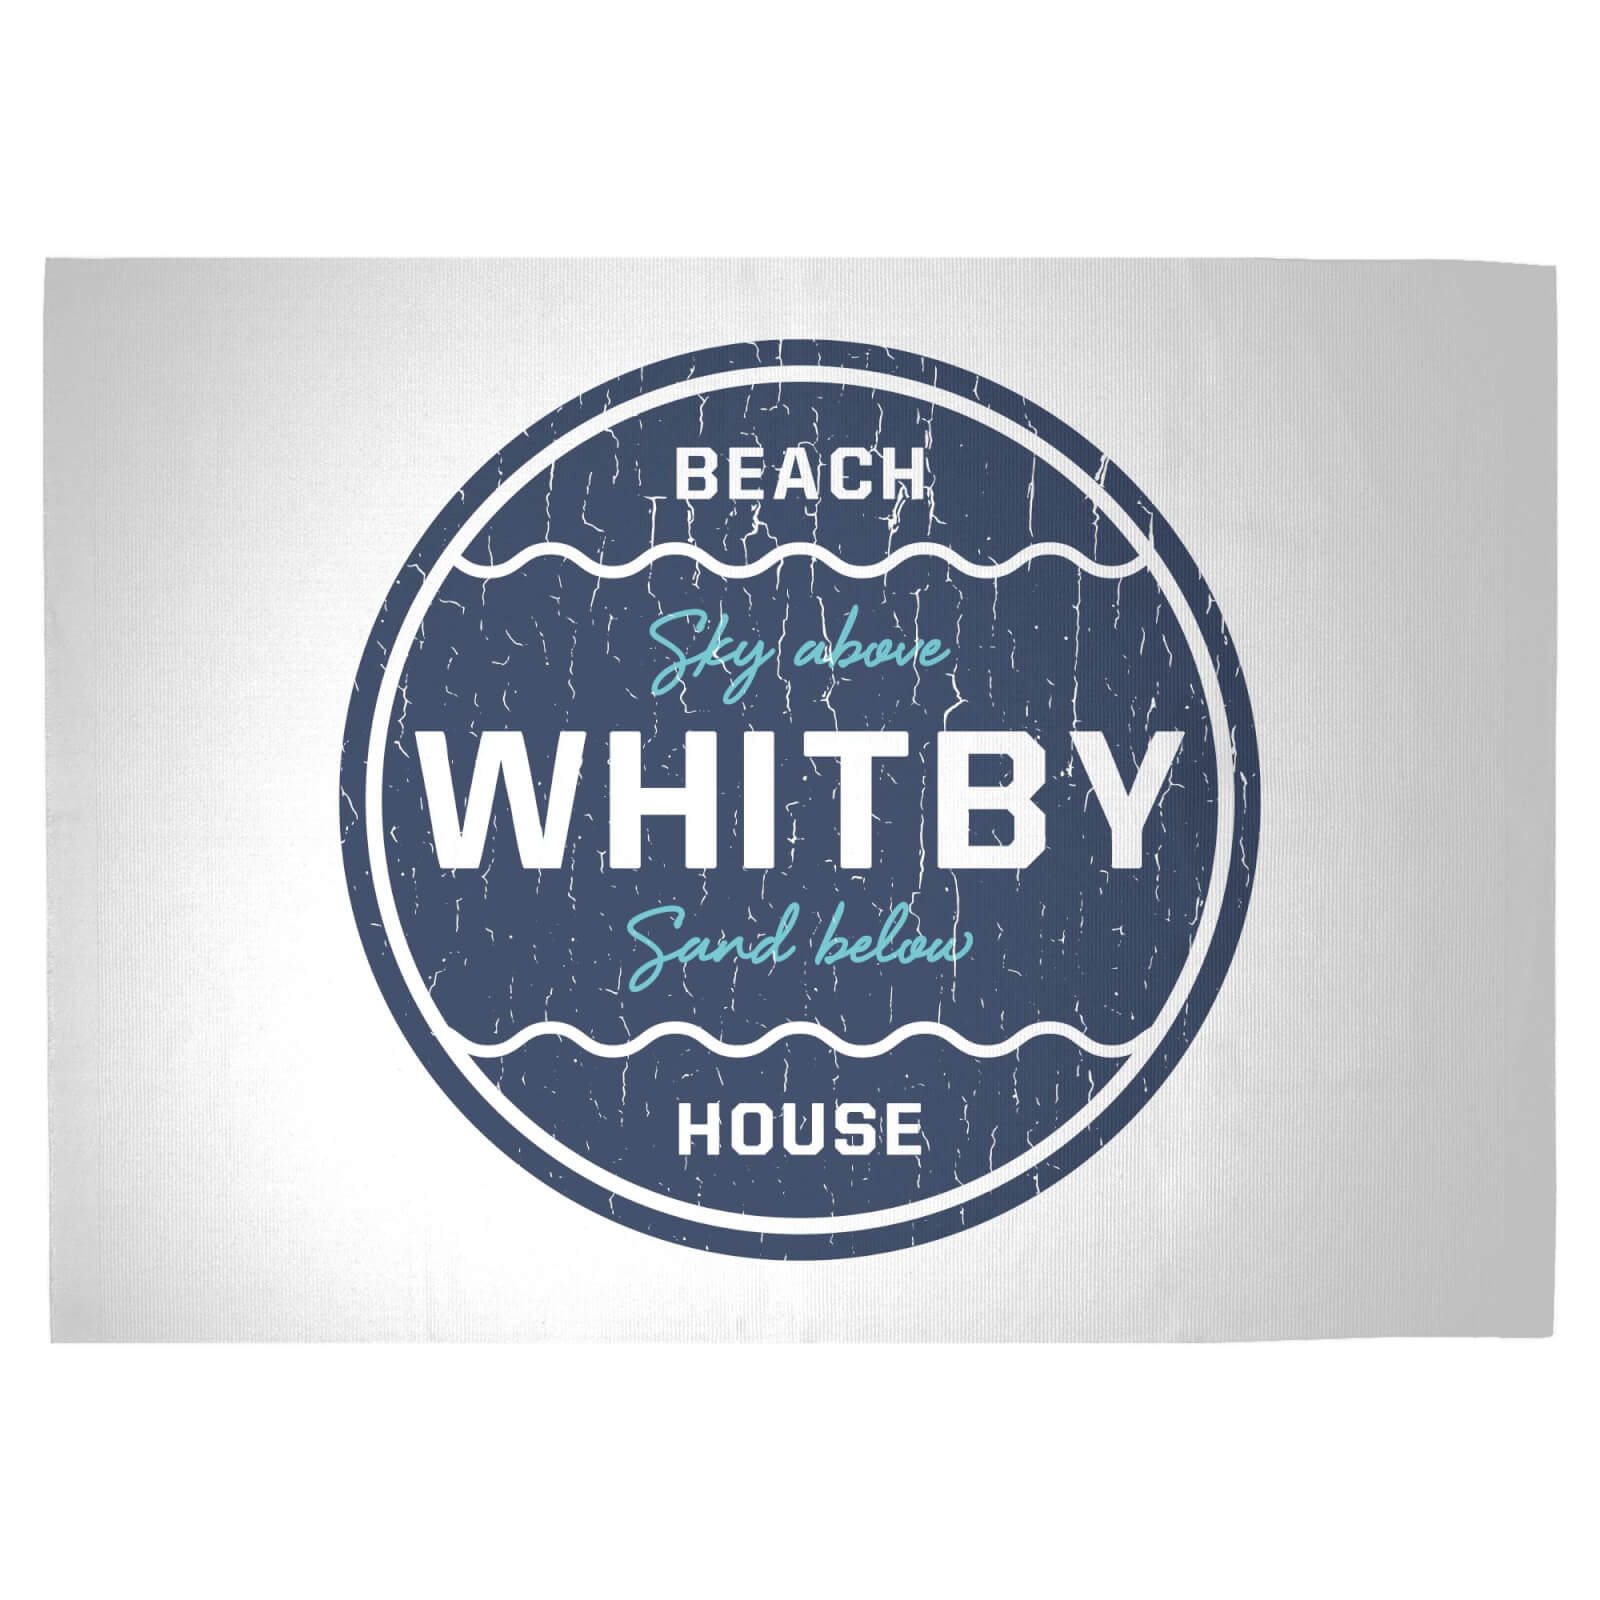 Whitby Beach Badge Woven Rug - Large